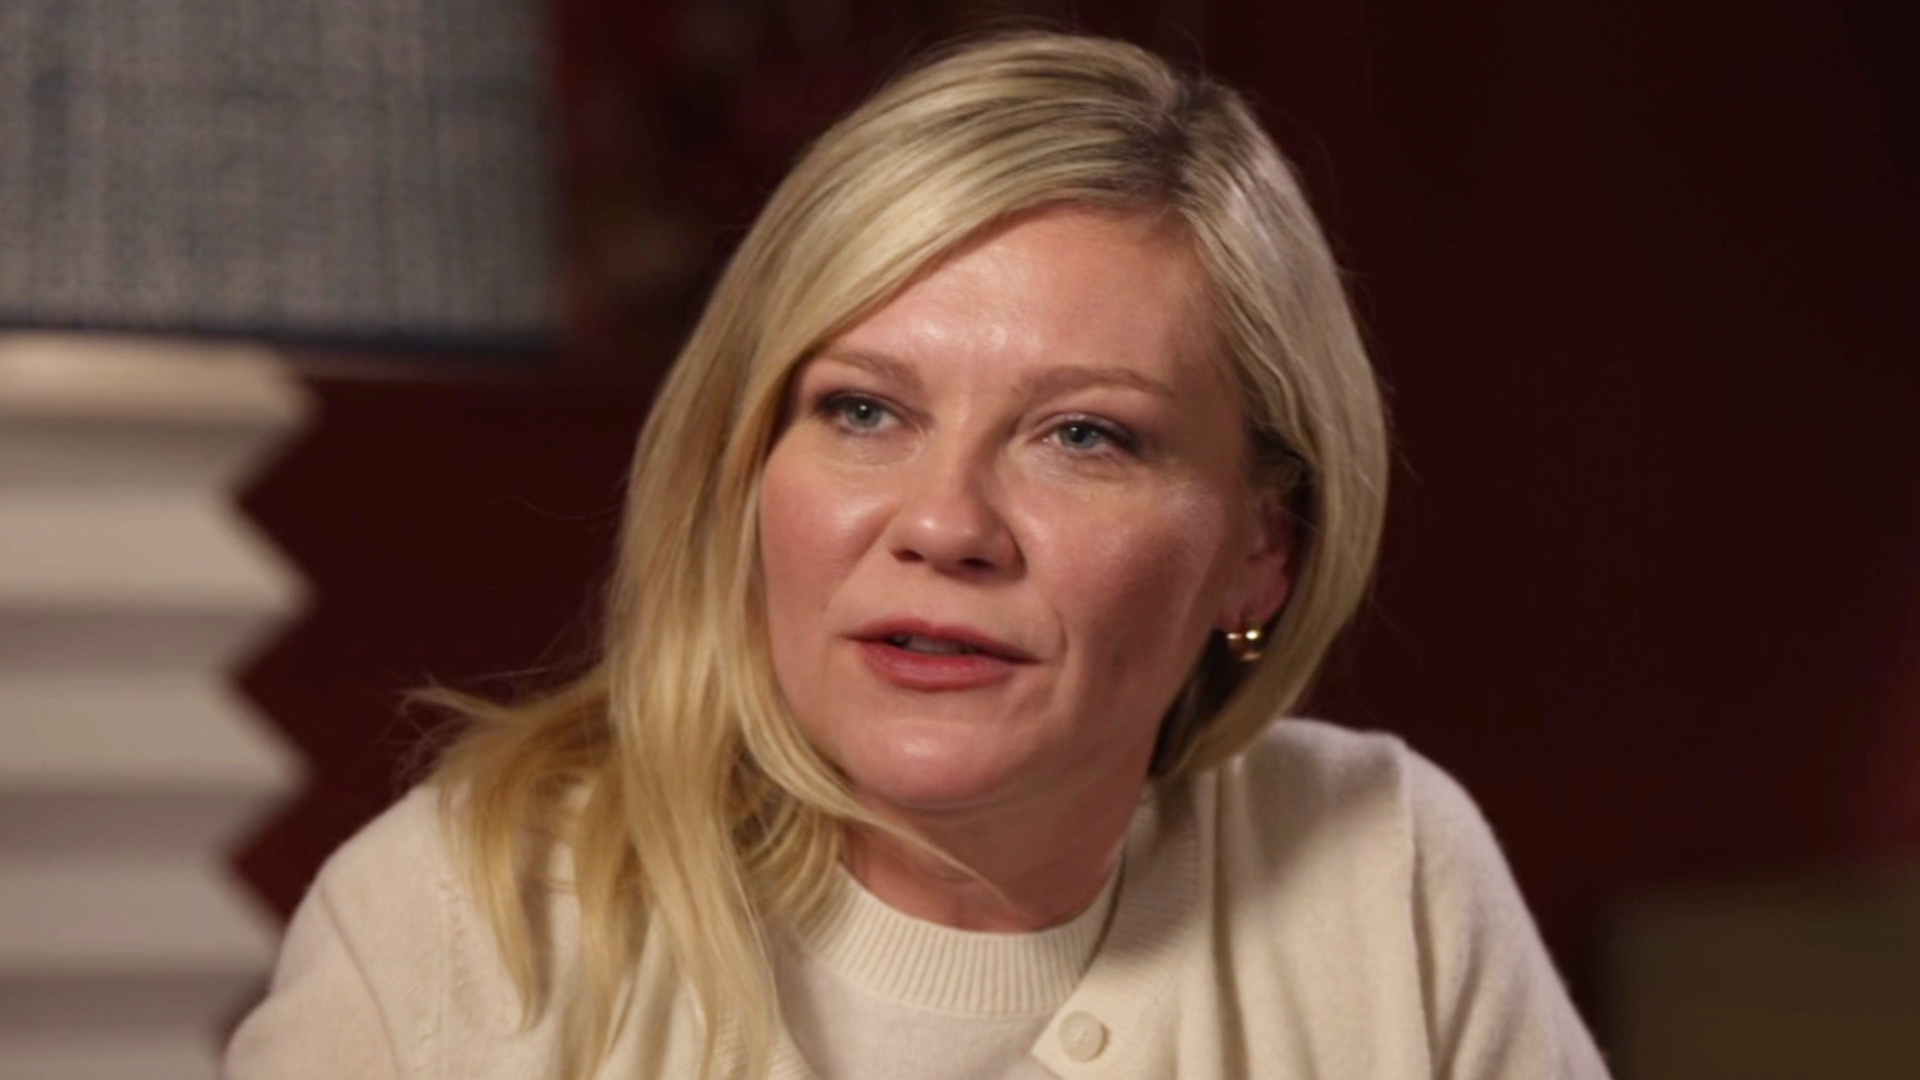 ‘What happened to her voice?’ Kirsten Dunst asked as she sounds ‘so different’ in video as fans beg her ‘stop smoking’